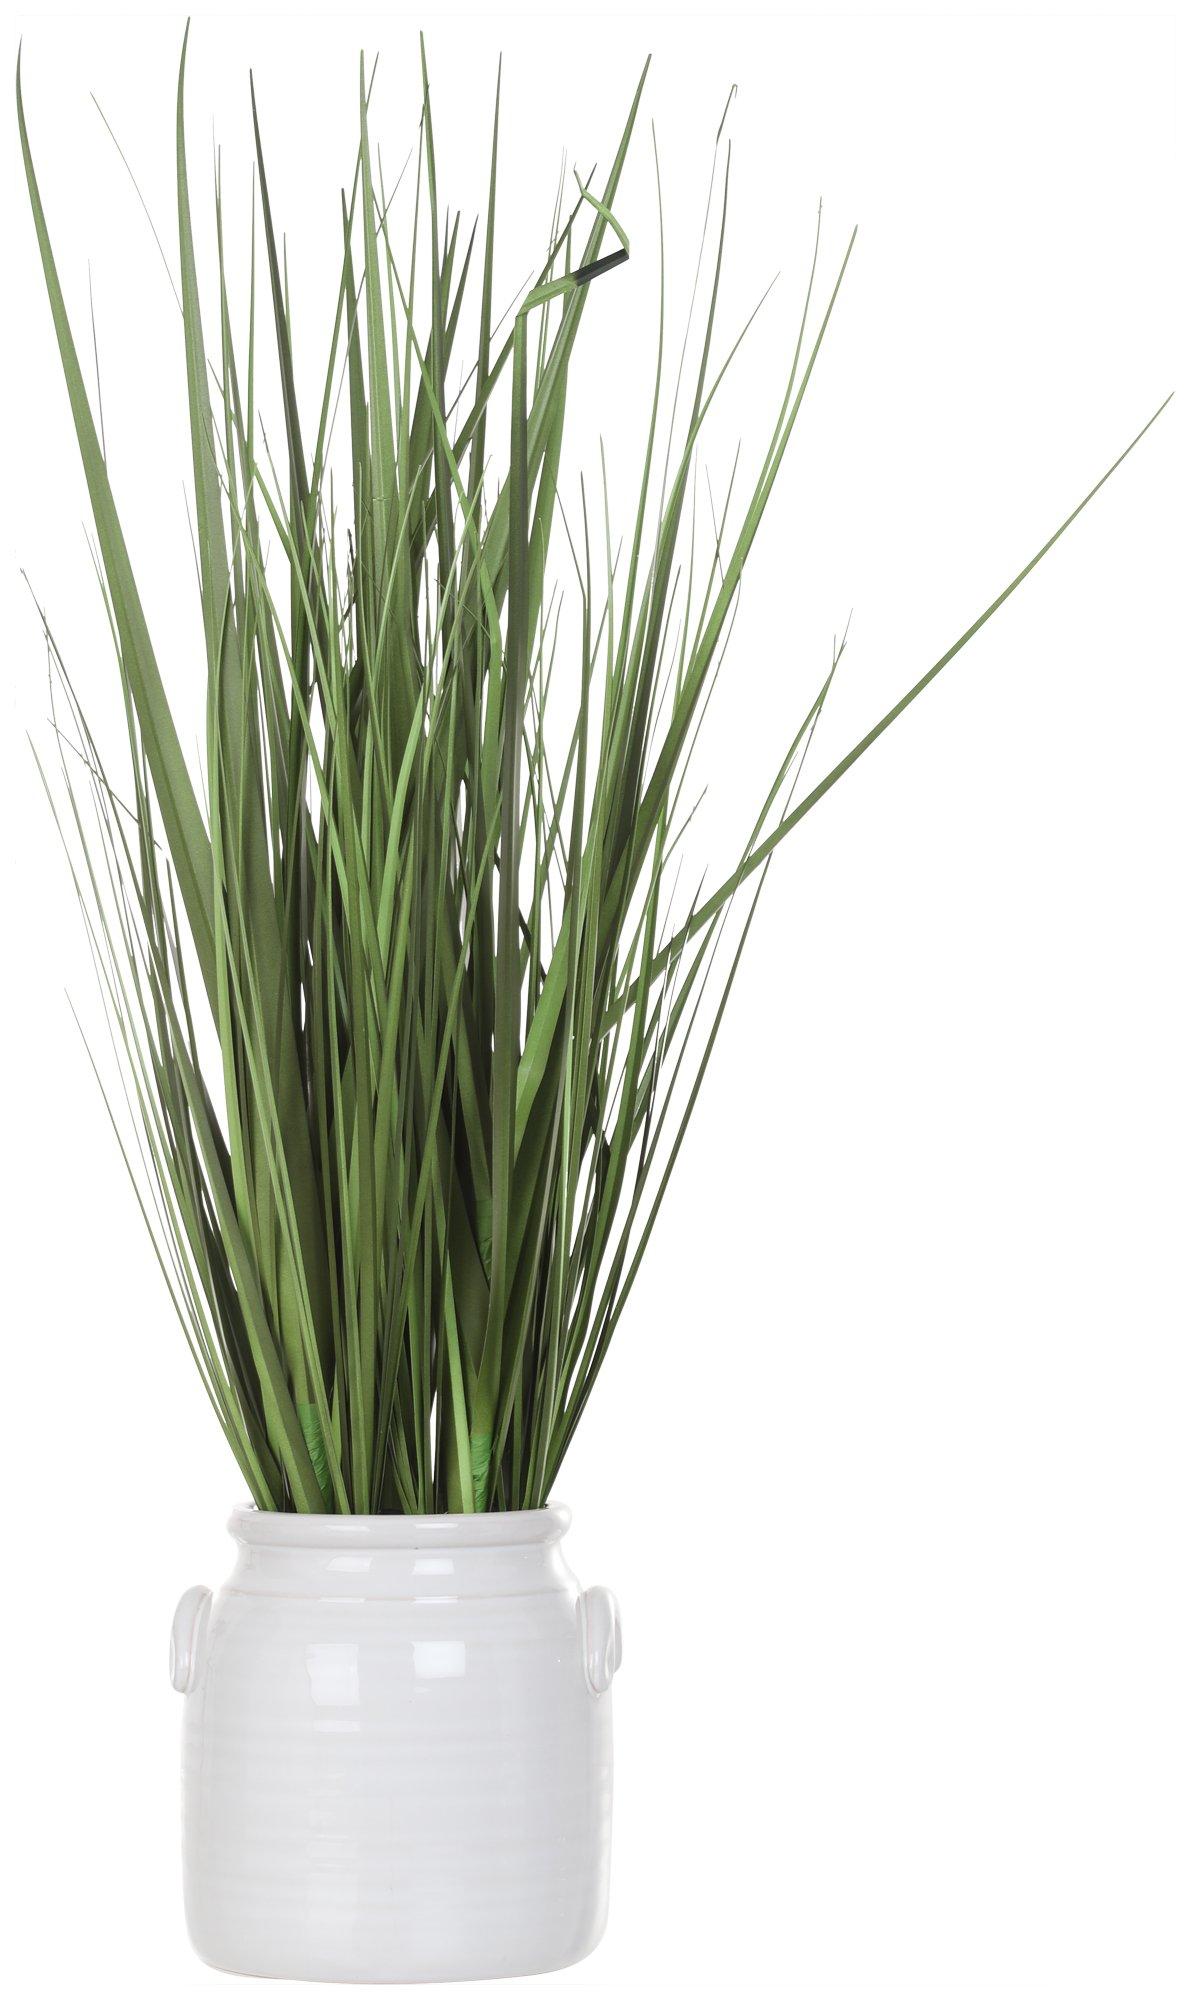 30 in Faux Tall Grass Decorative Plant